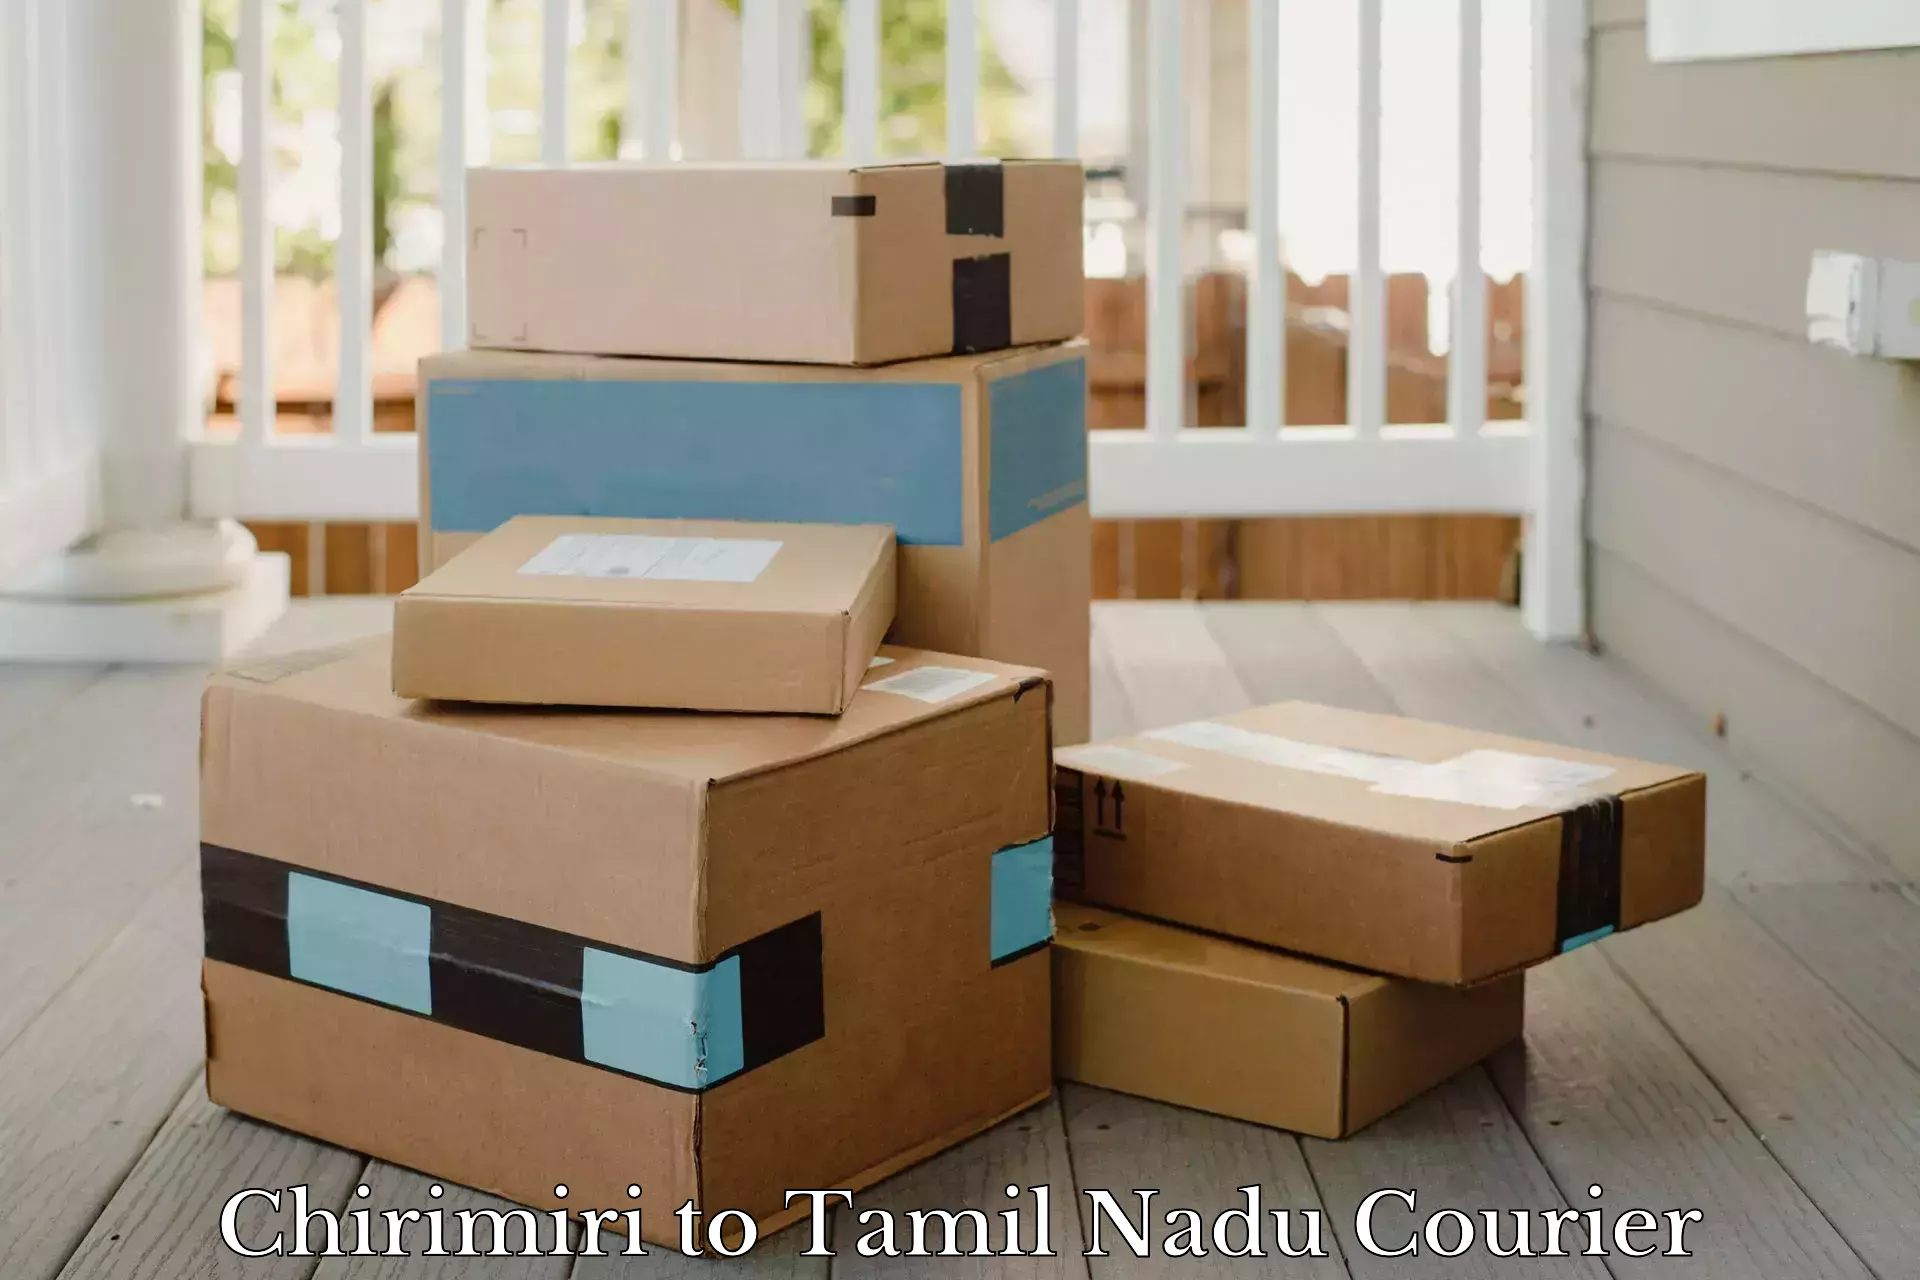 Customer-friendly courier services Chirimiri to Tamil Nadu